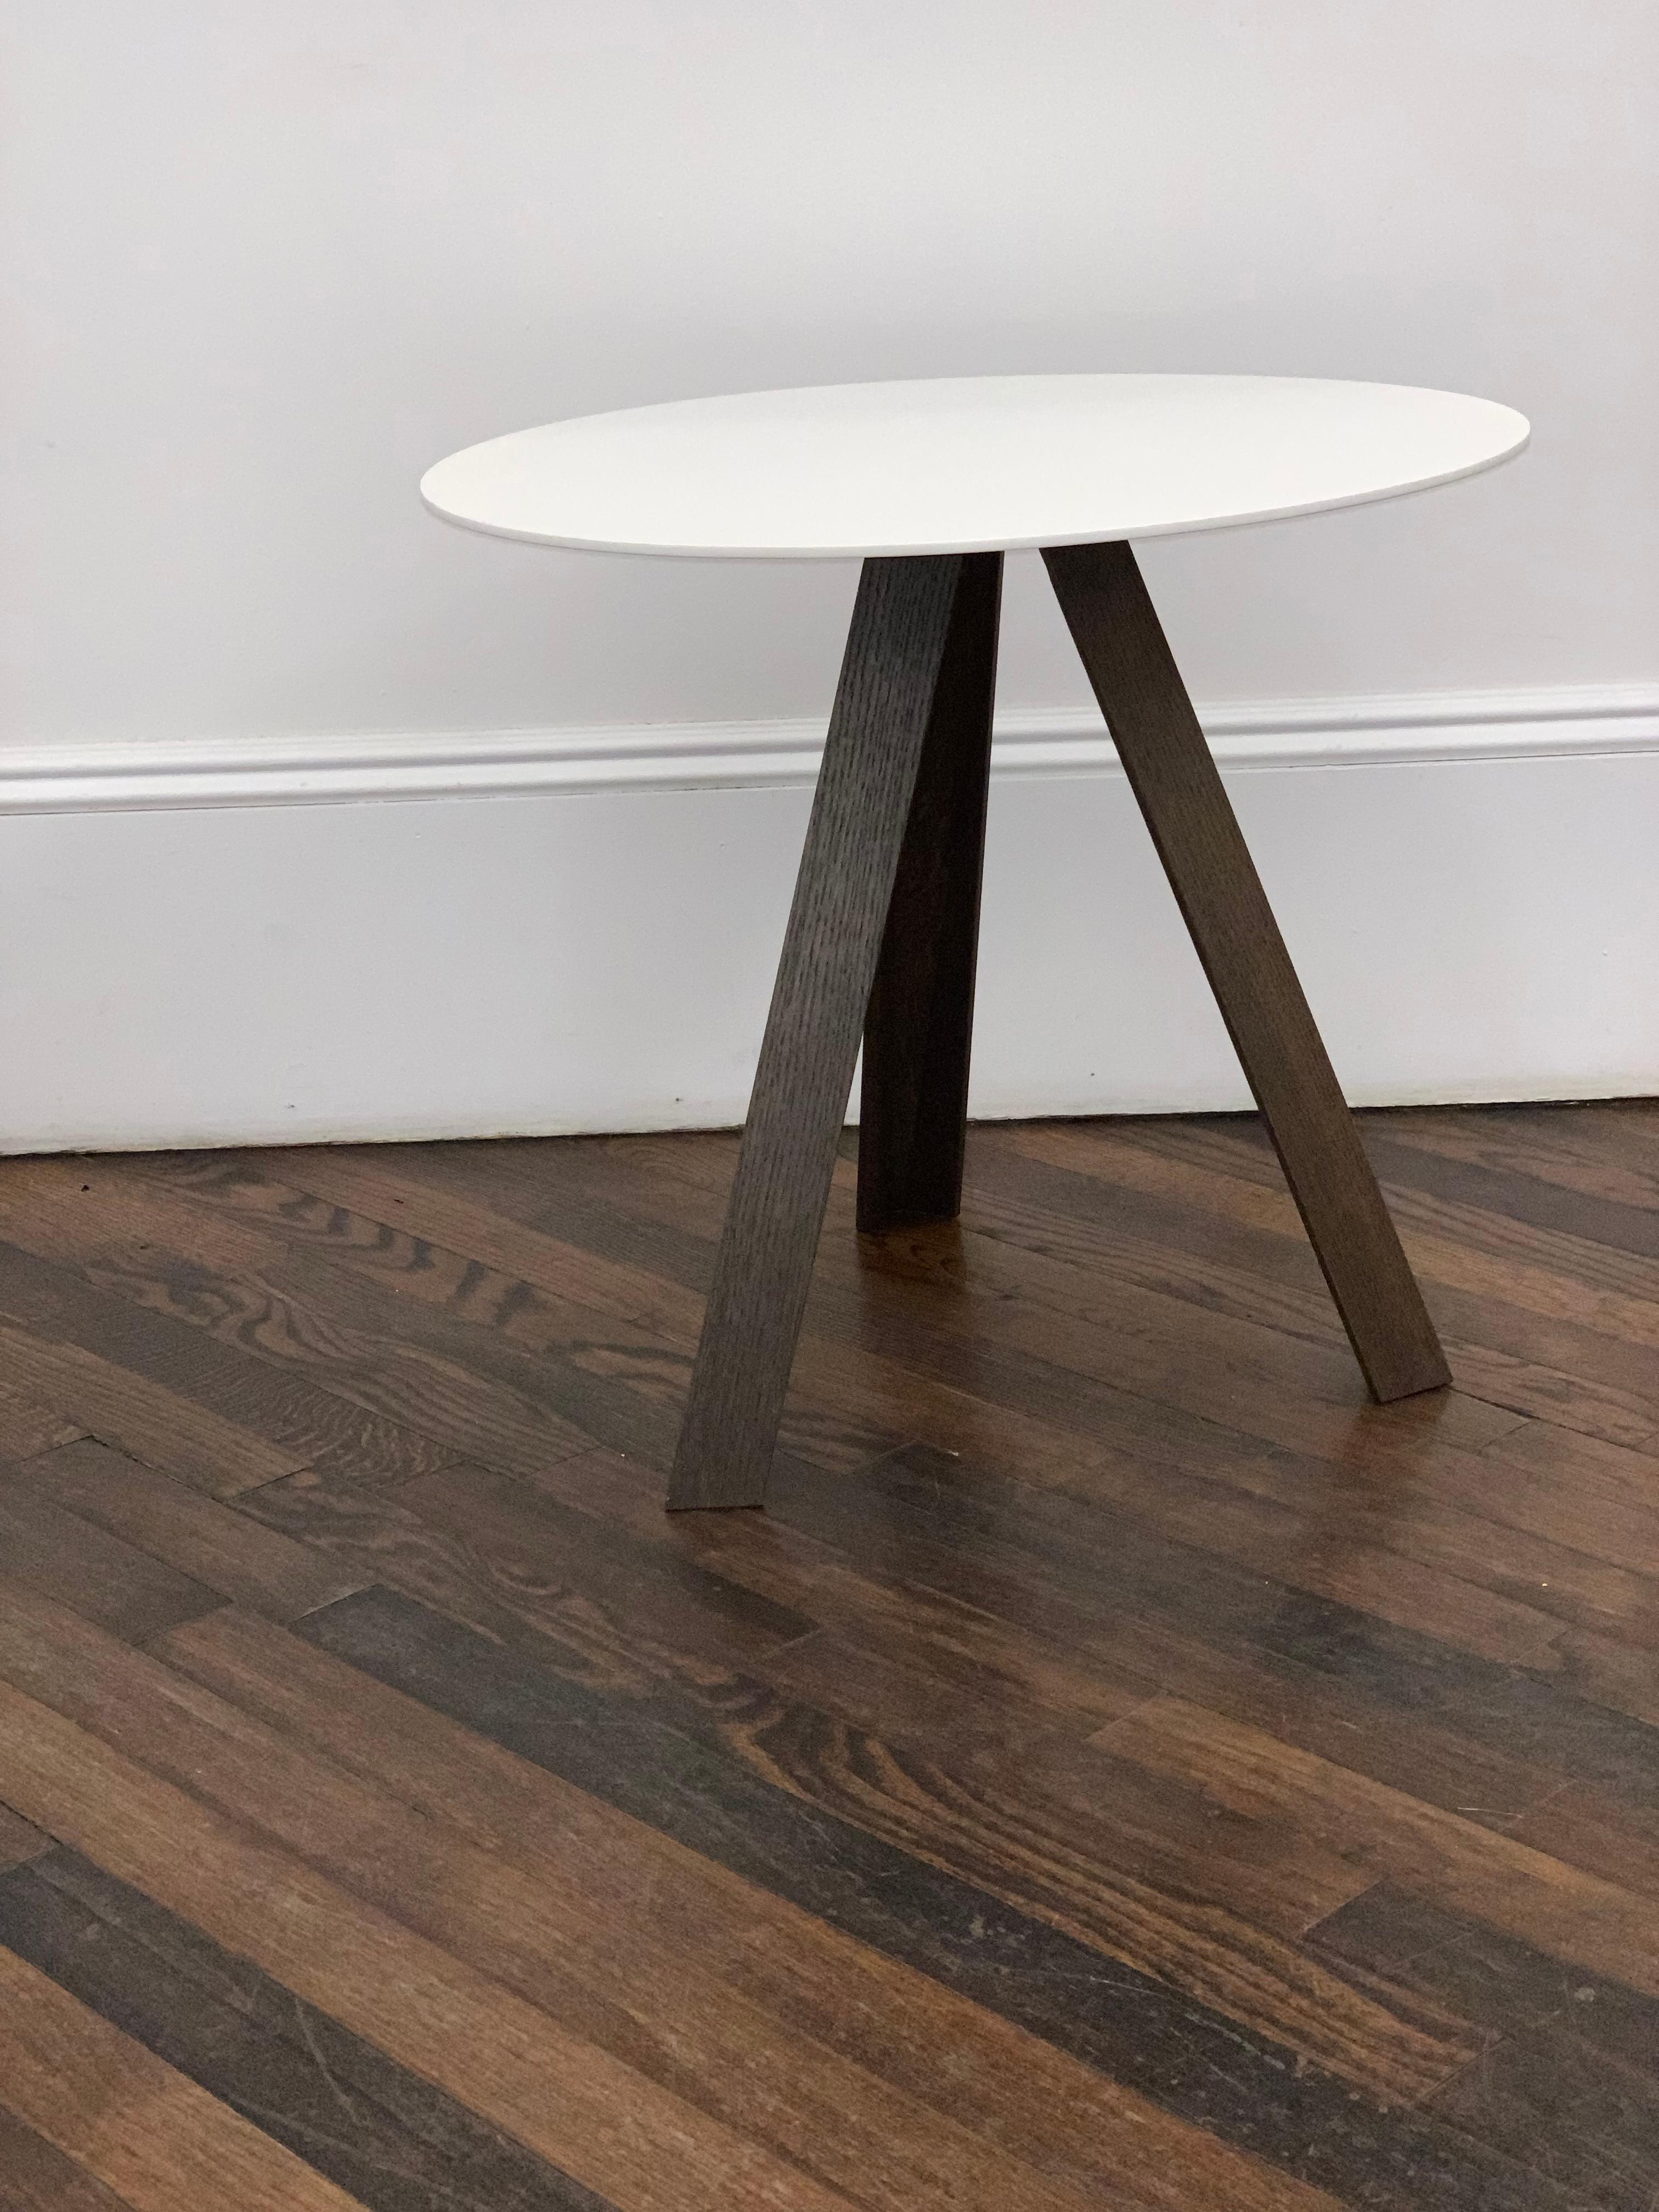 Tre is a playful piece of furniture that can be installed anywhere as handy occasional table. As the name Tre suggests, the number three is central to the design. 
Walnut stain base.